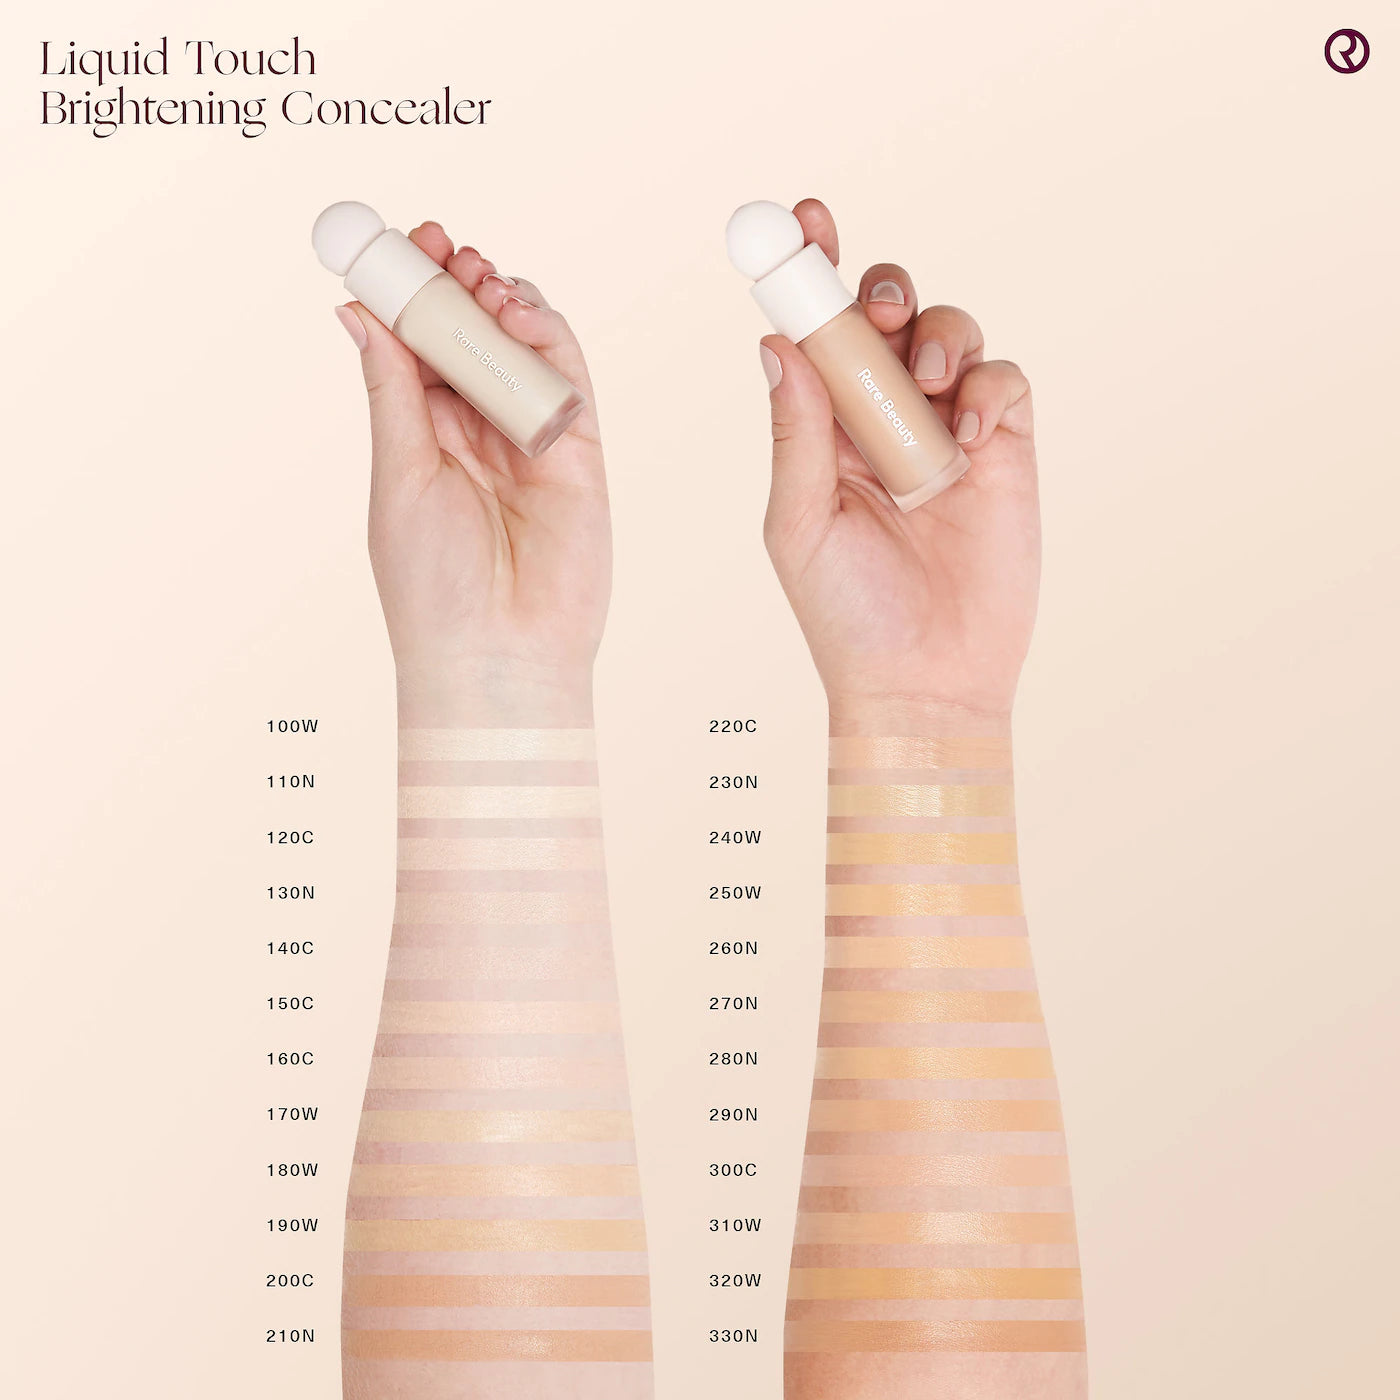 Rare Beauty Liquid Touch Brightening Concealer | 170W